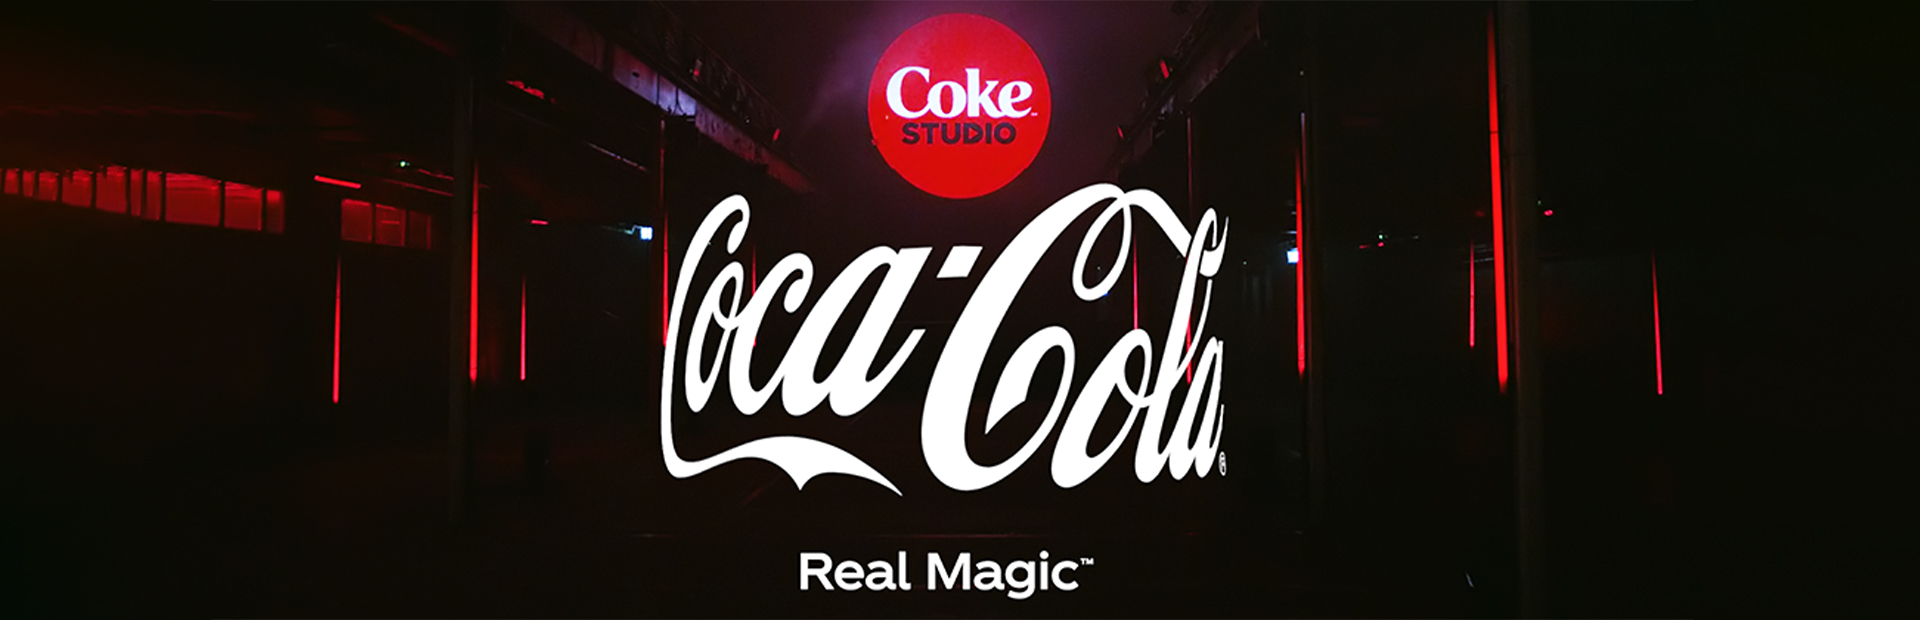 CocaCola launches global music platform 'Coke Studio' with vibrant new